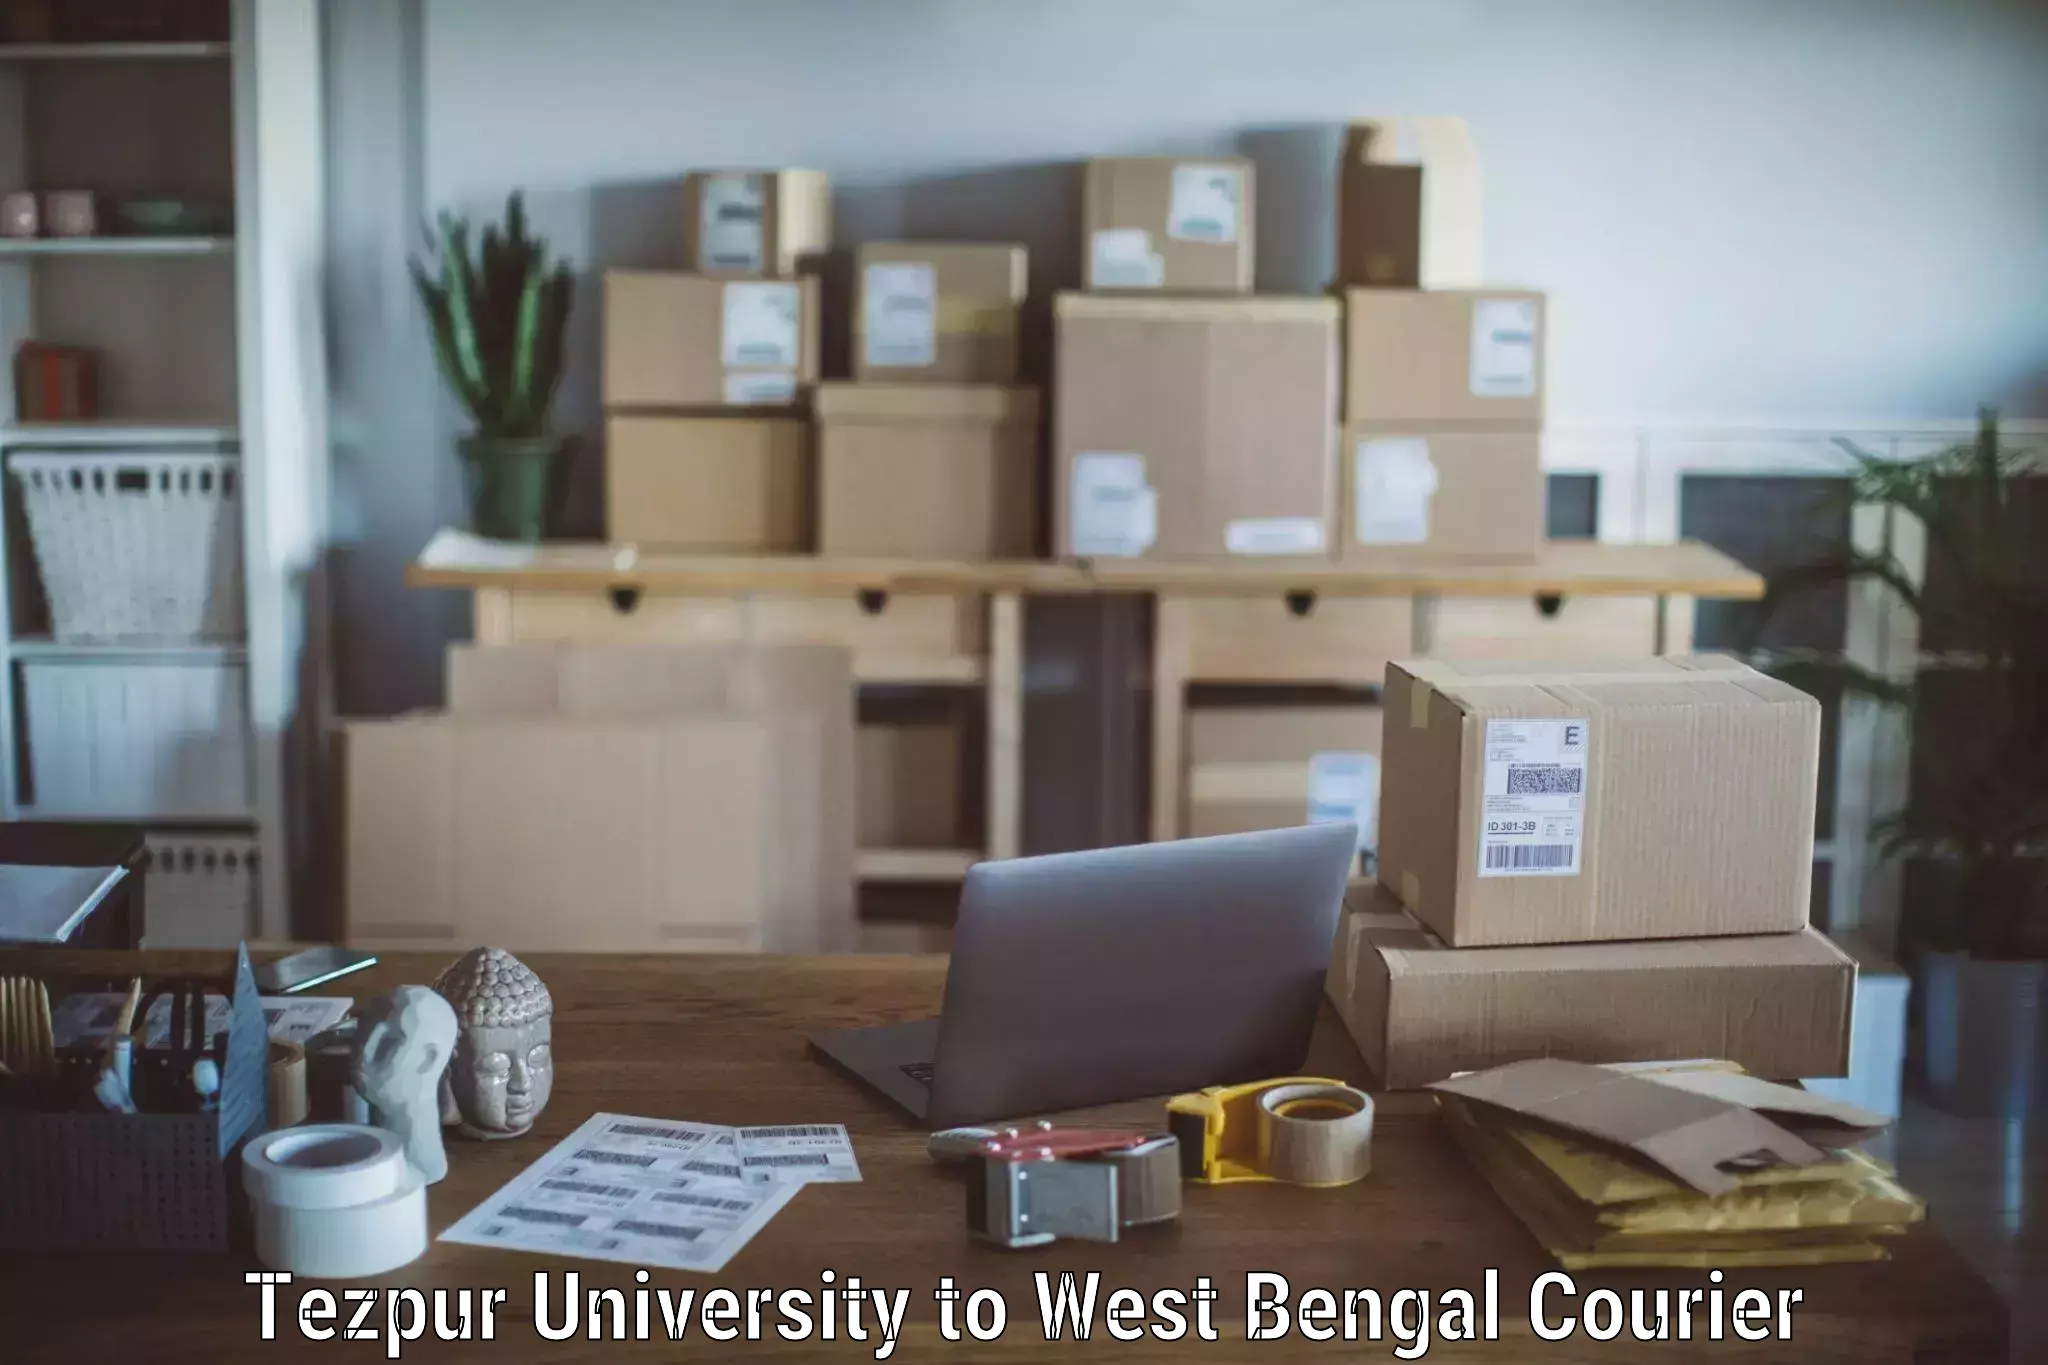 Quality furniture shipping in Tezpur University to Bolpur